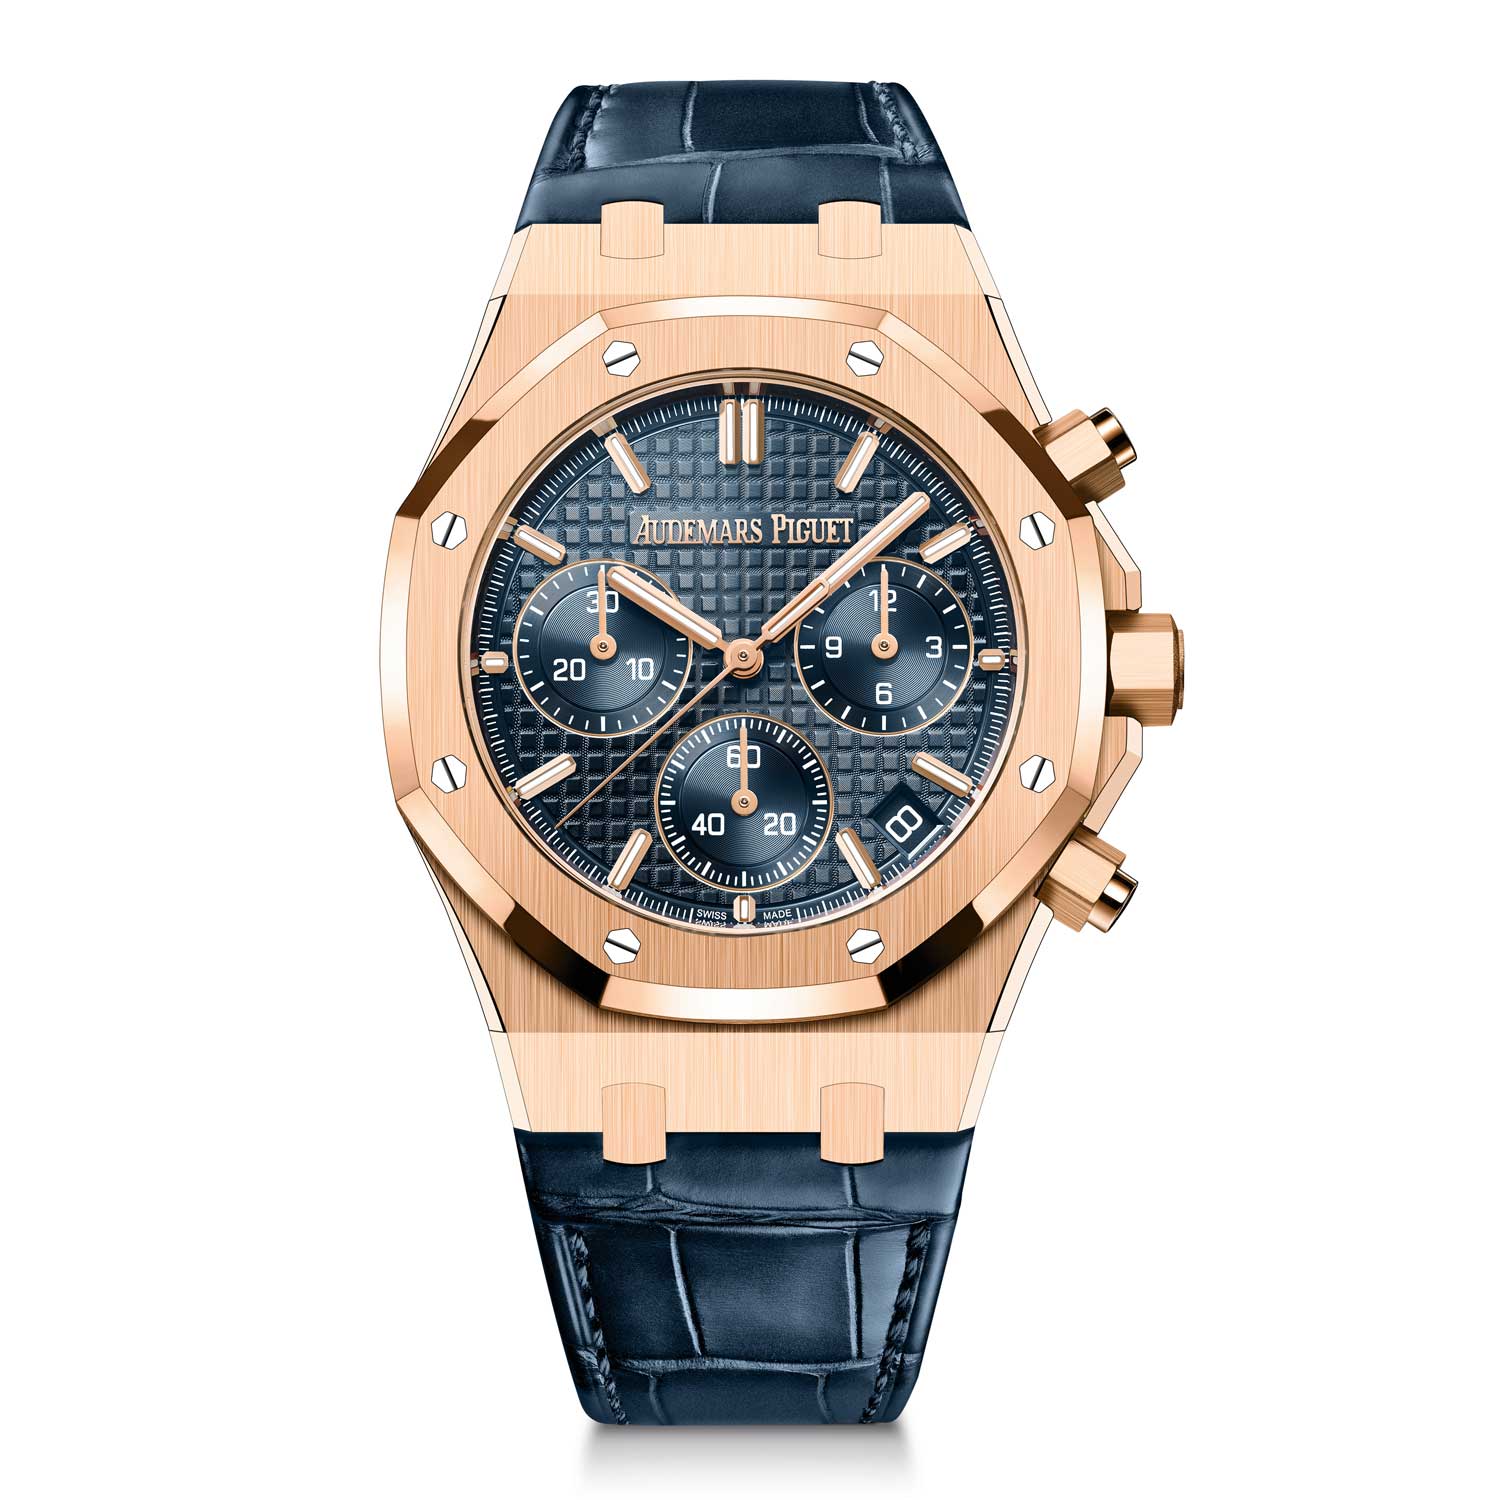 The Royal Oak Chronograph ref. 26240, which is equipped with the in-house automatic cal. 4401